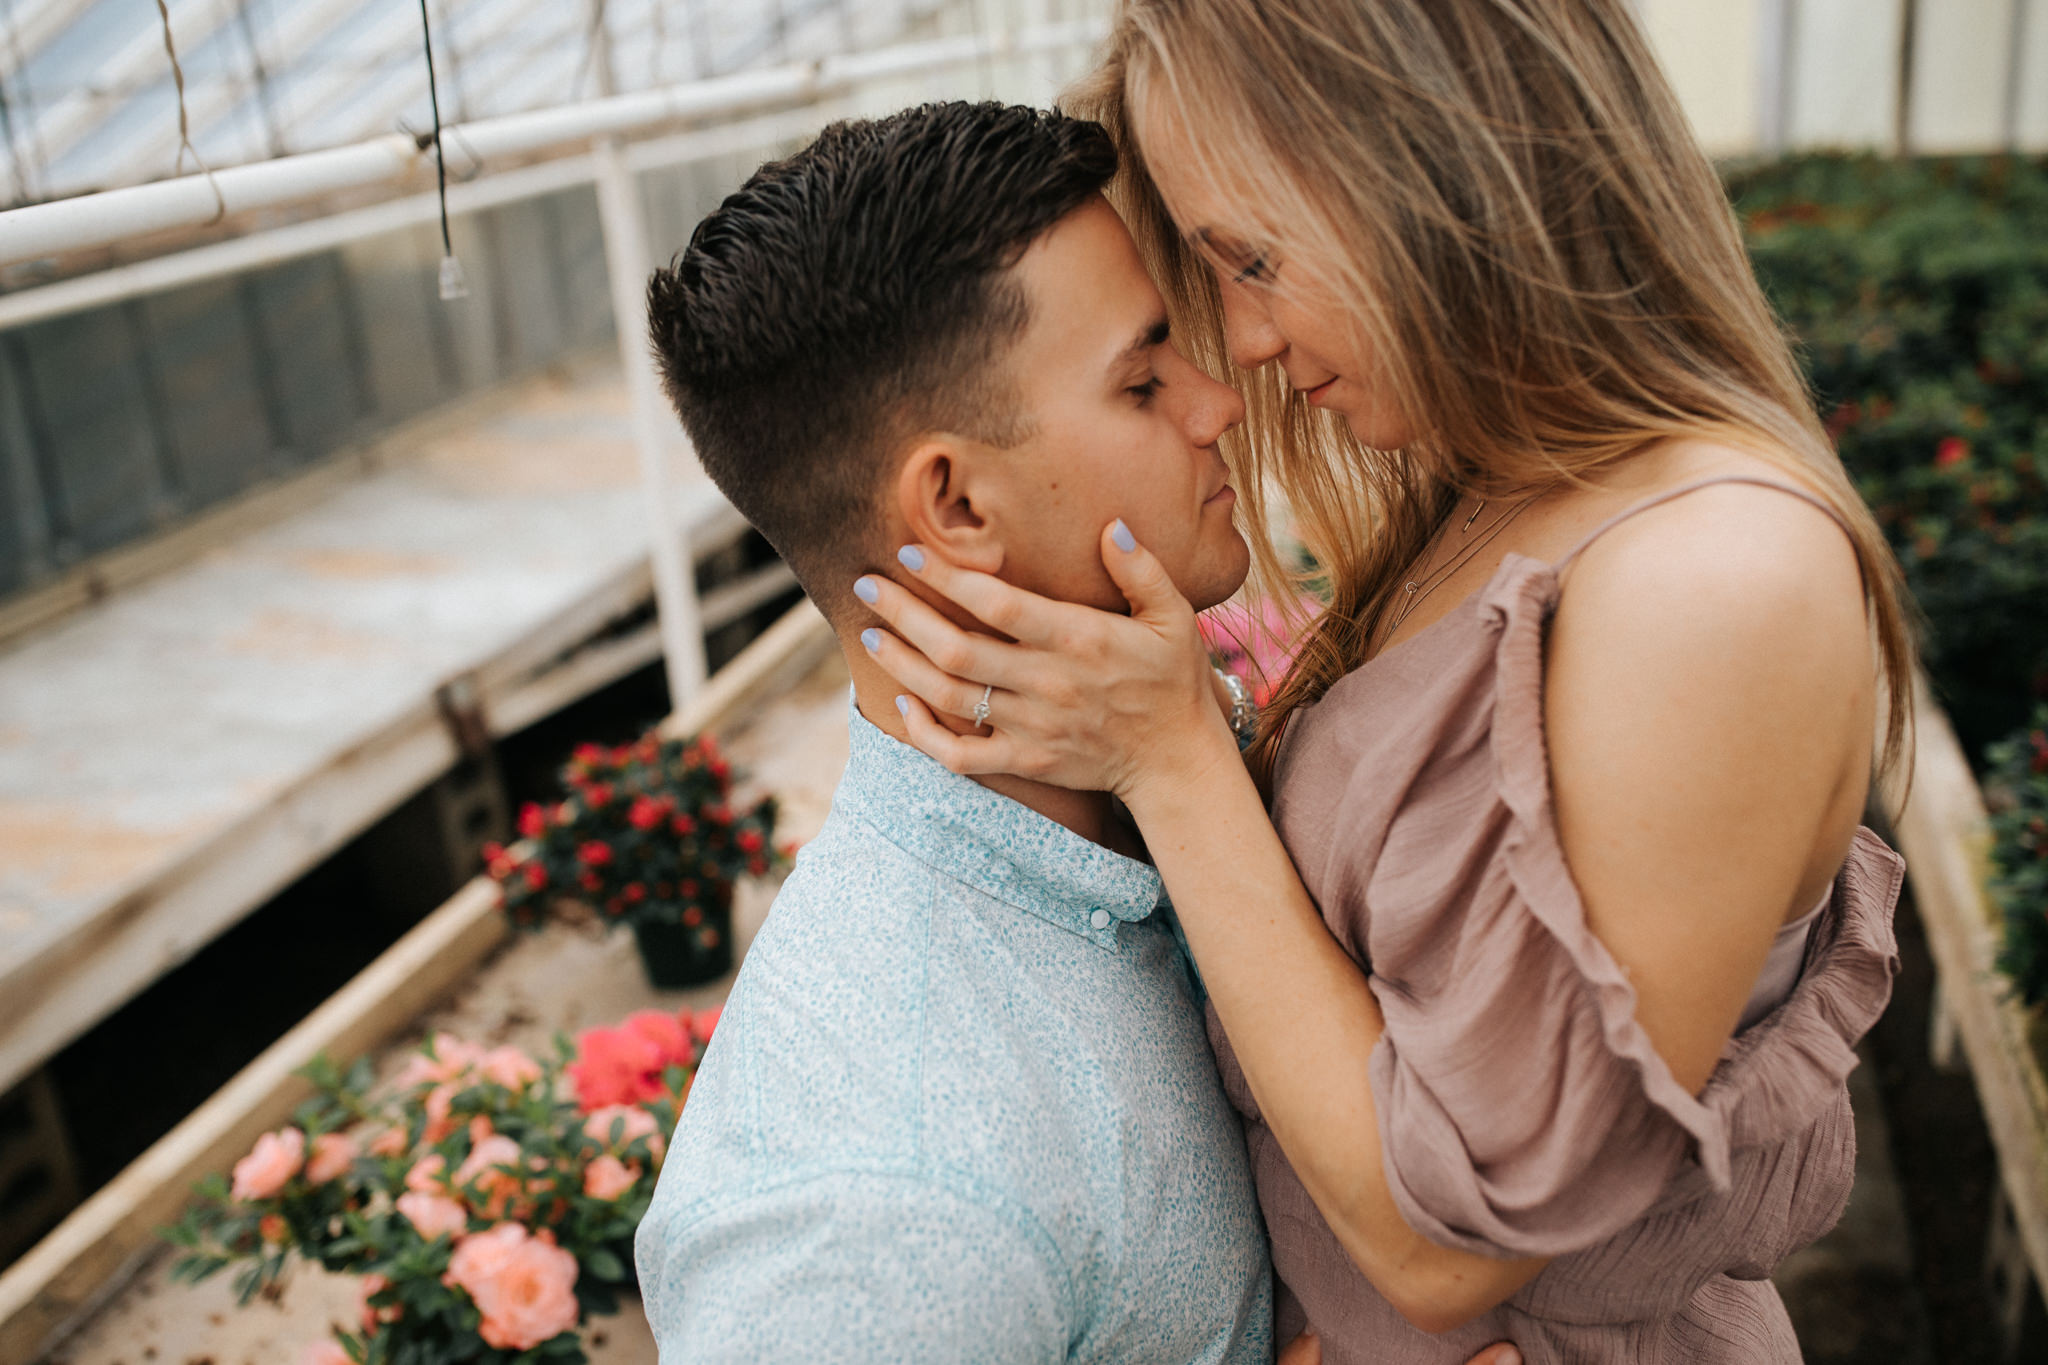 memphis-engagement-photographer-thewarmtharoundyou-greenhouse-engagement-pictures (81 of 118).jpg